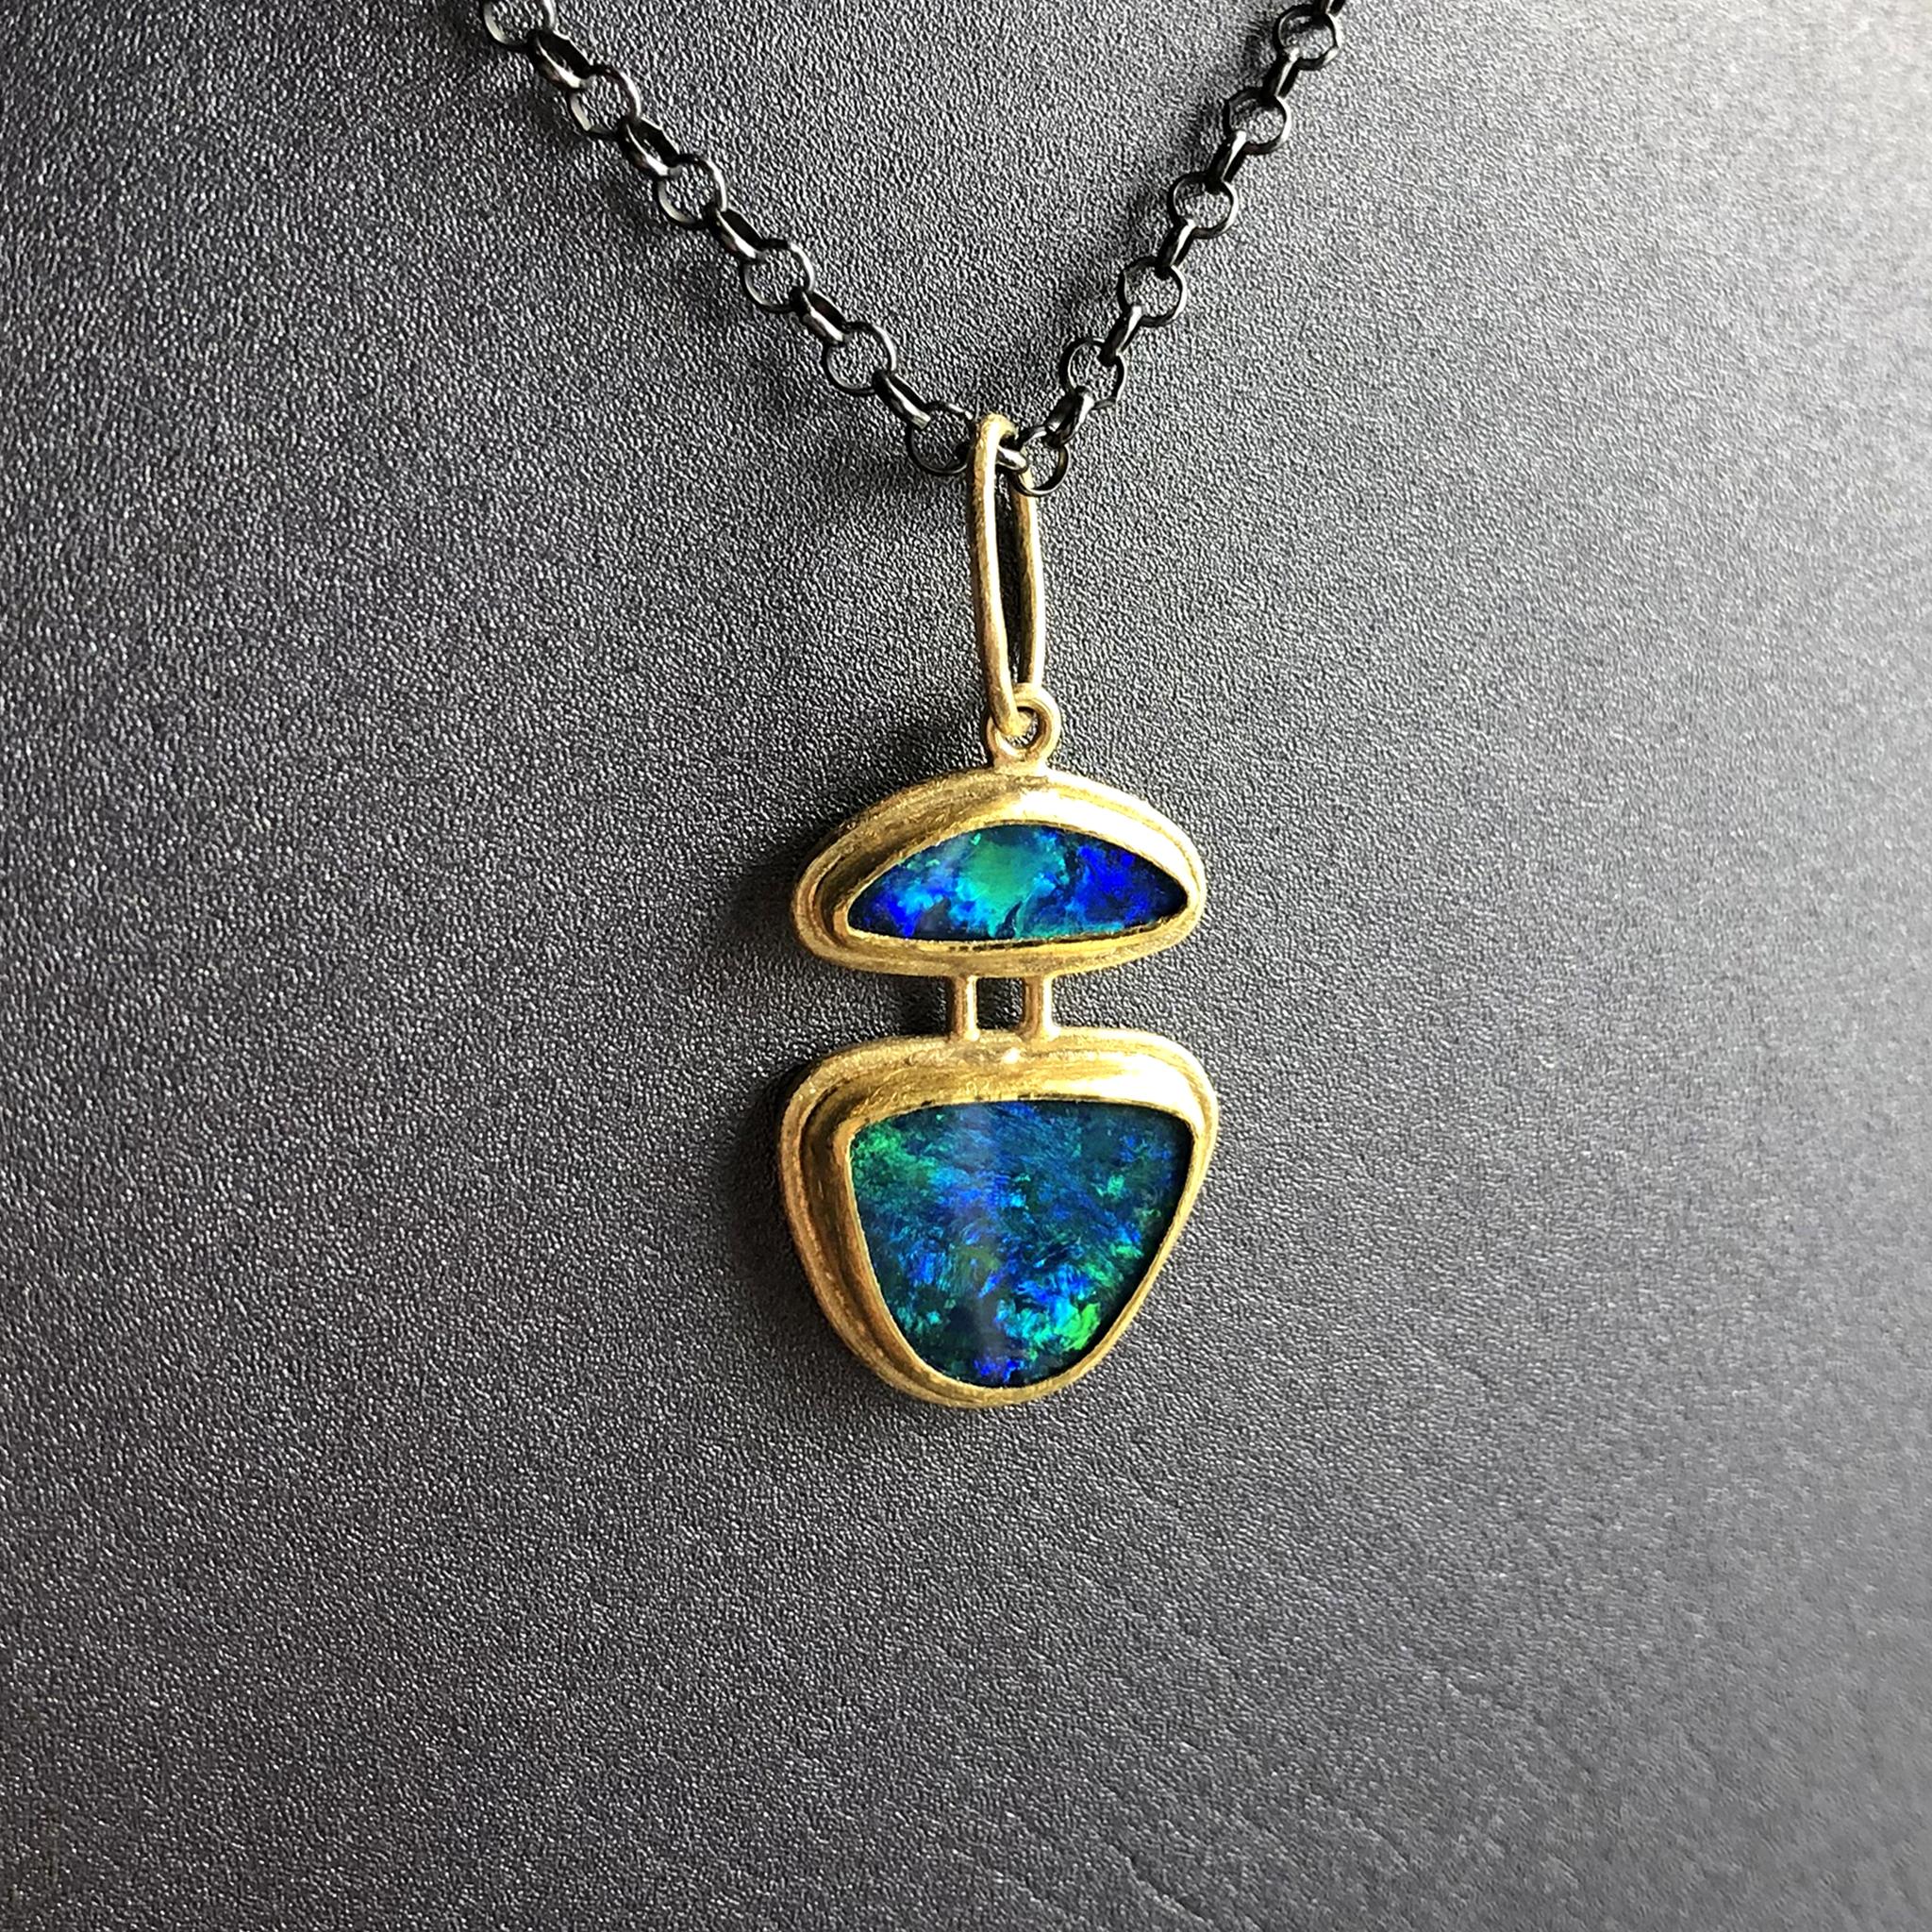 One of a Kind Necklace hand-fabricated by acclaimed jewelry maker Petra Class featuring two fiery Autralian opal doublets bezel-set in the artist's signature finely-textured 22k yellow gold. With a bail measuring 3/8 of an inch, the pendant can be